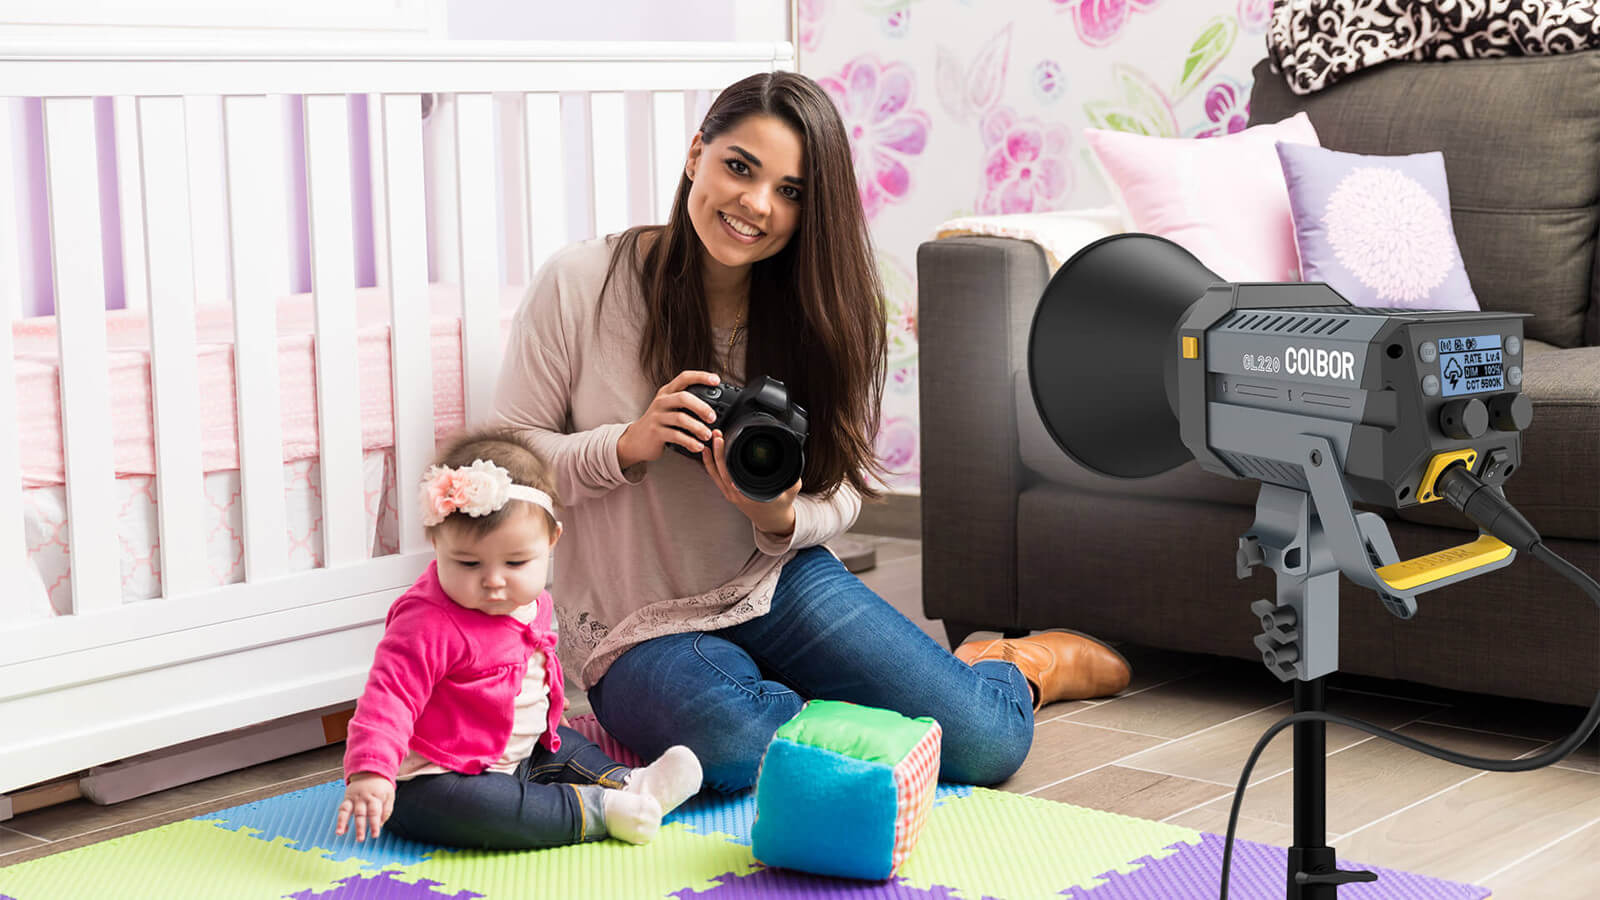 COLBOR CL220 LED constant light is a good choice for newborn photography lighting.